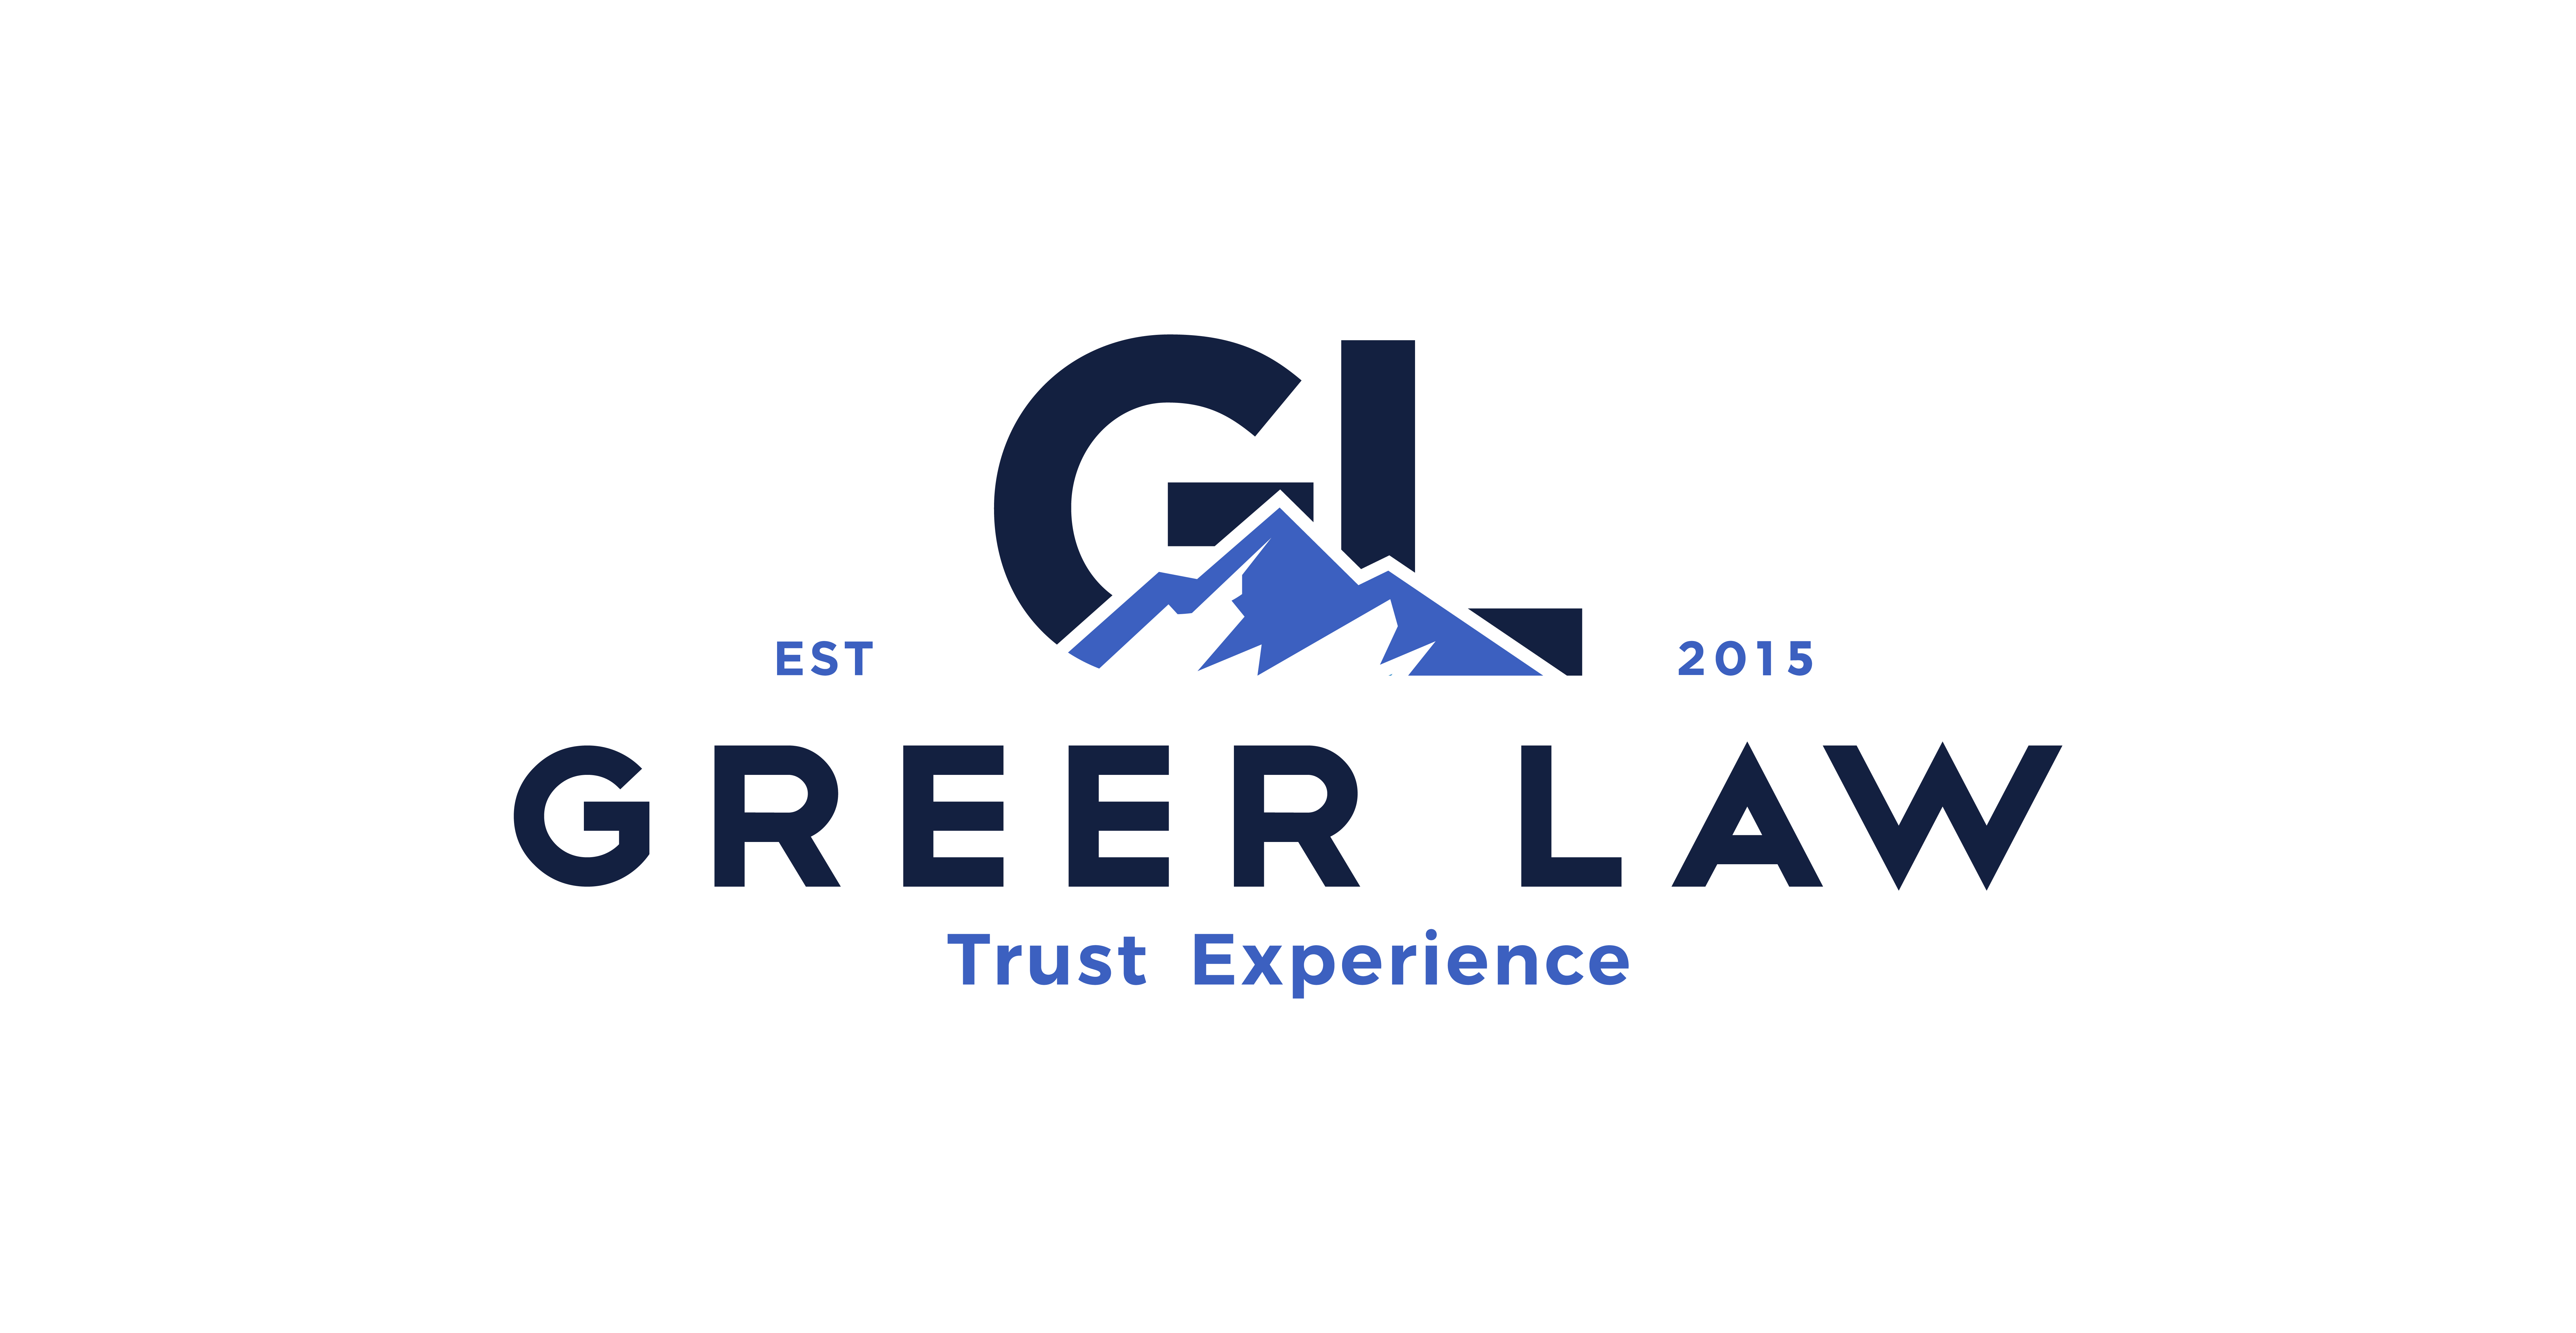 Thank you Greer Law